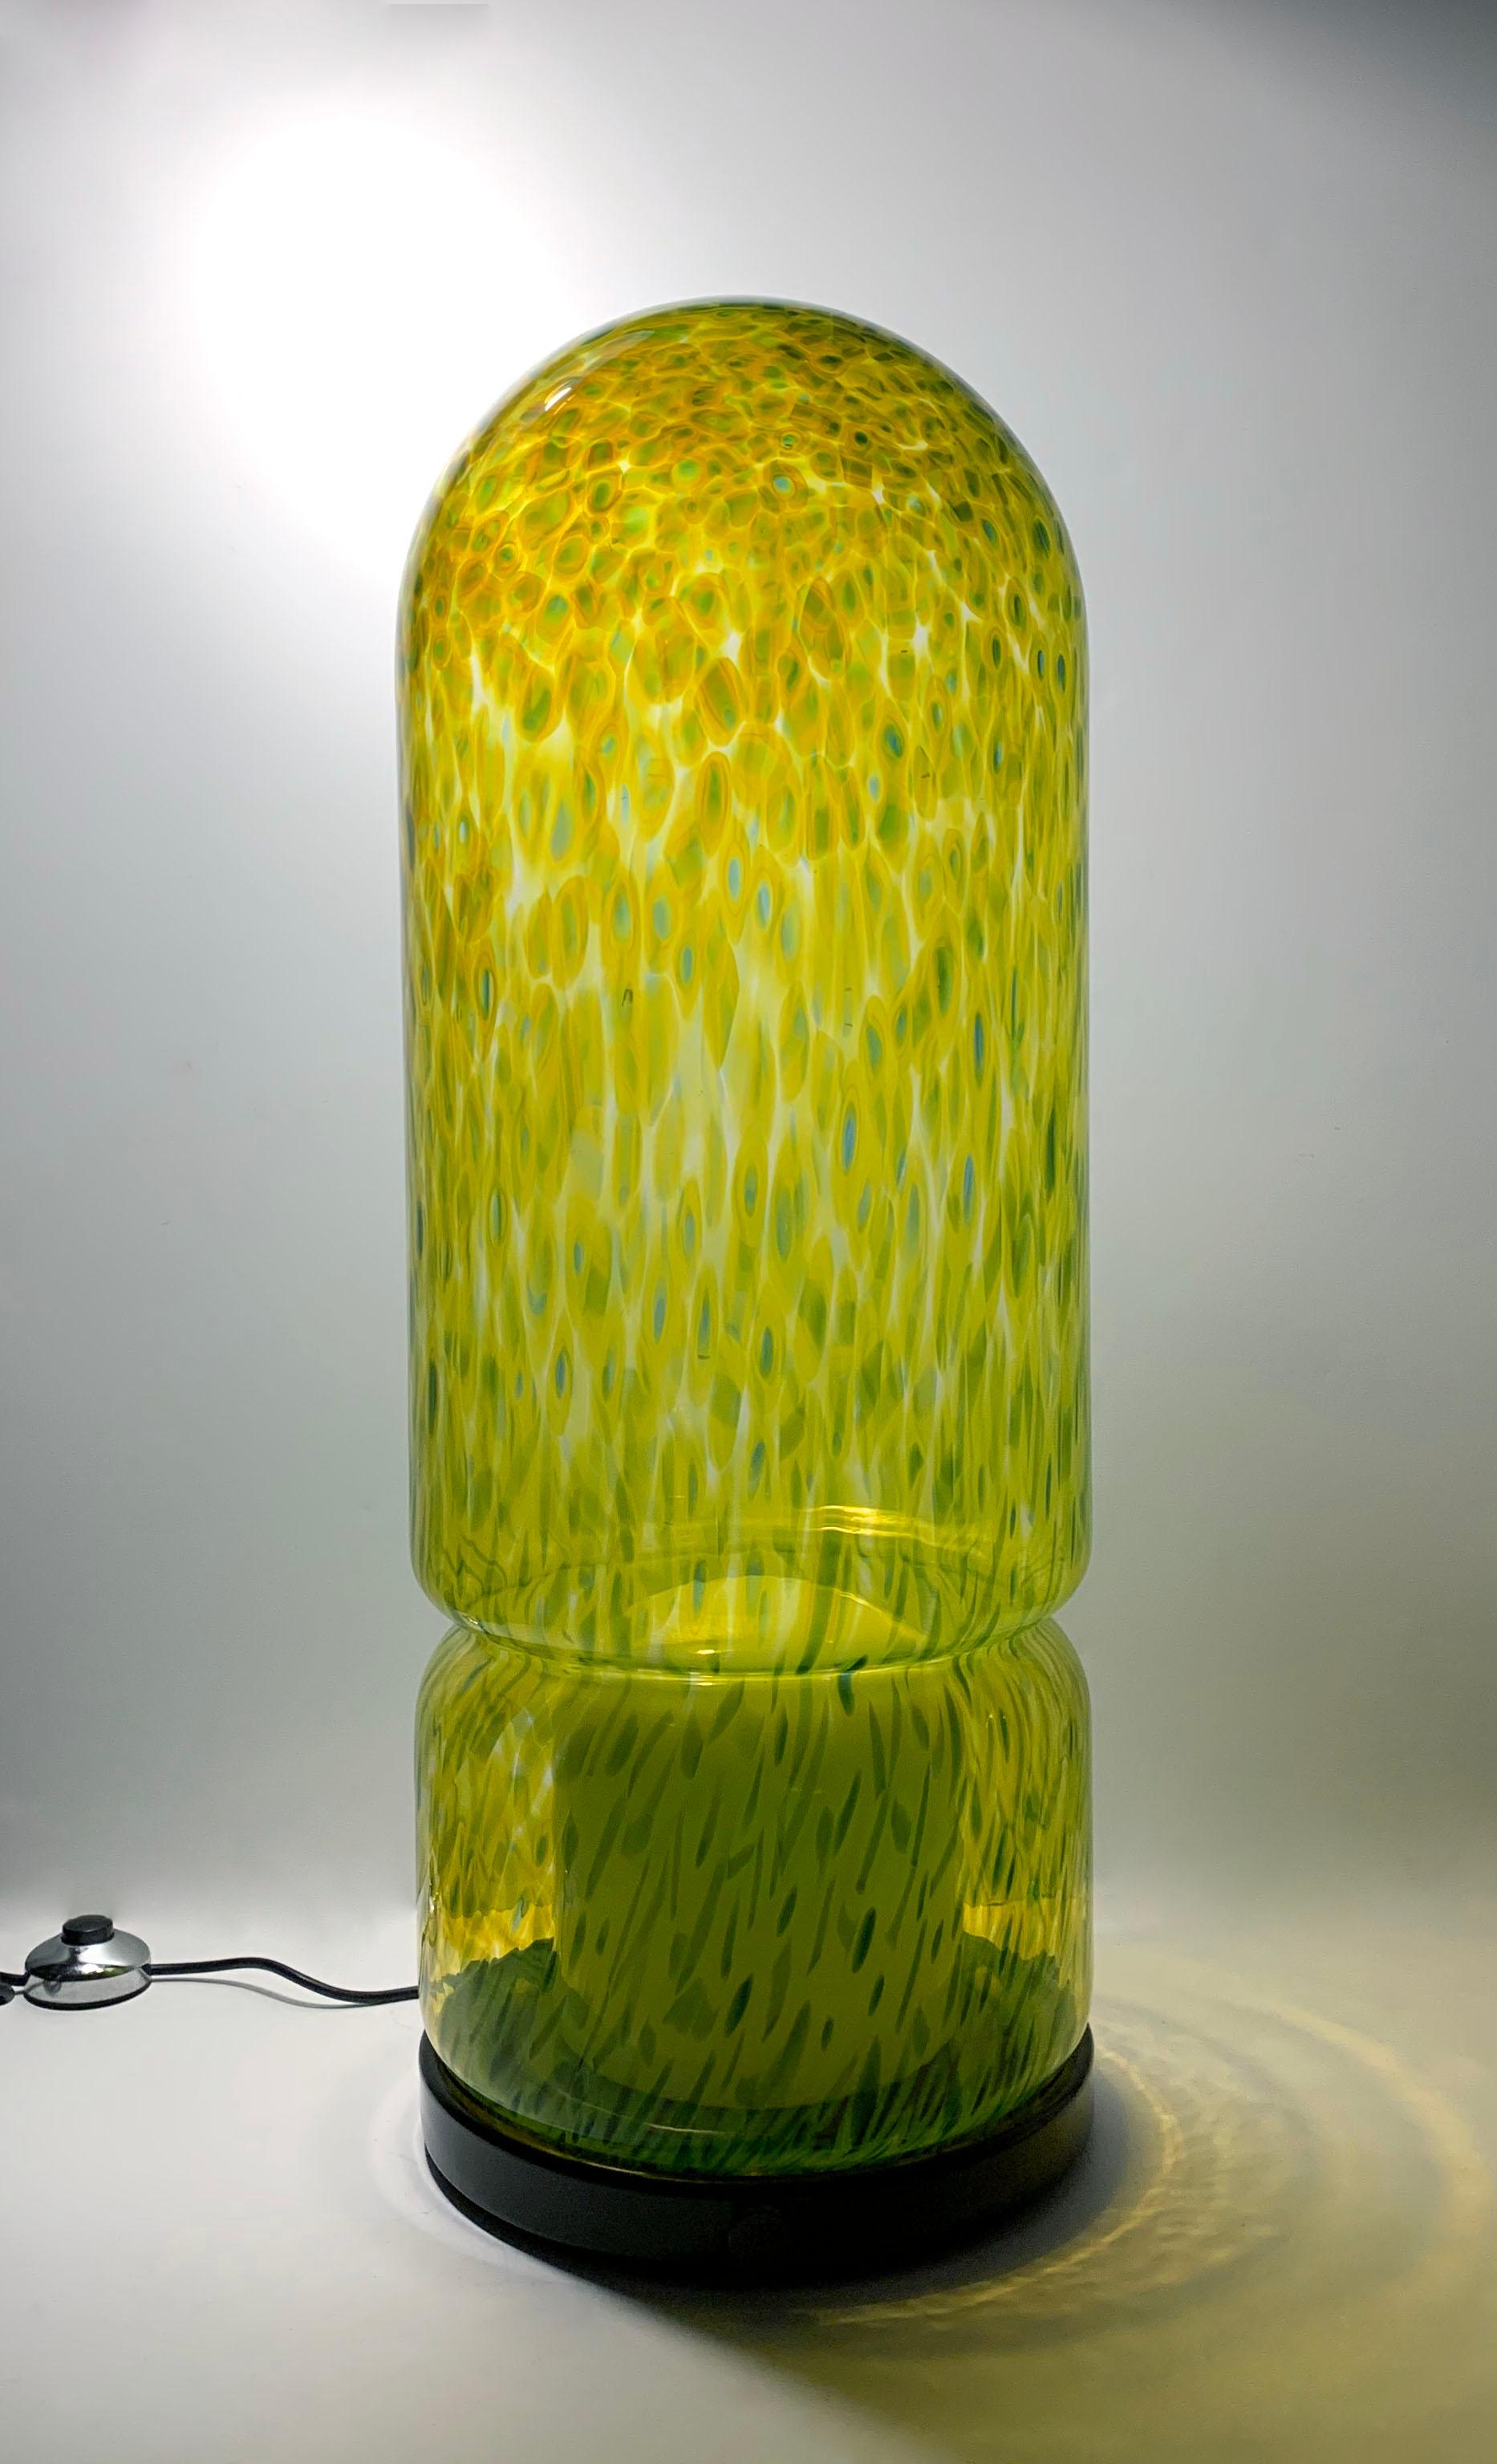 Pair of Large Vintage Vistosi Architectural Glass Lamps by Gae Aulenti In Good Condition For Sale In Chicago, IL